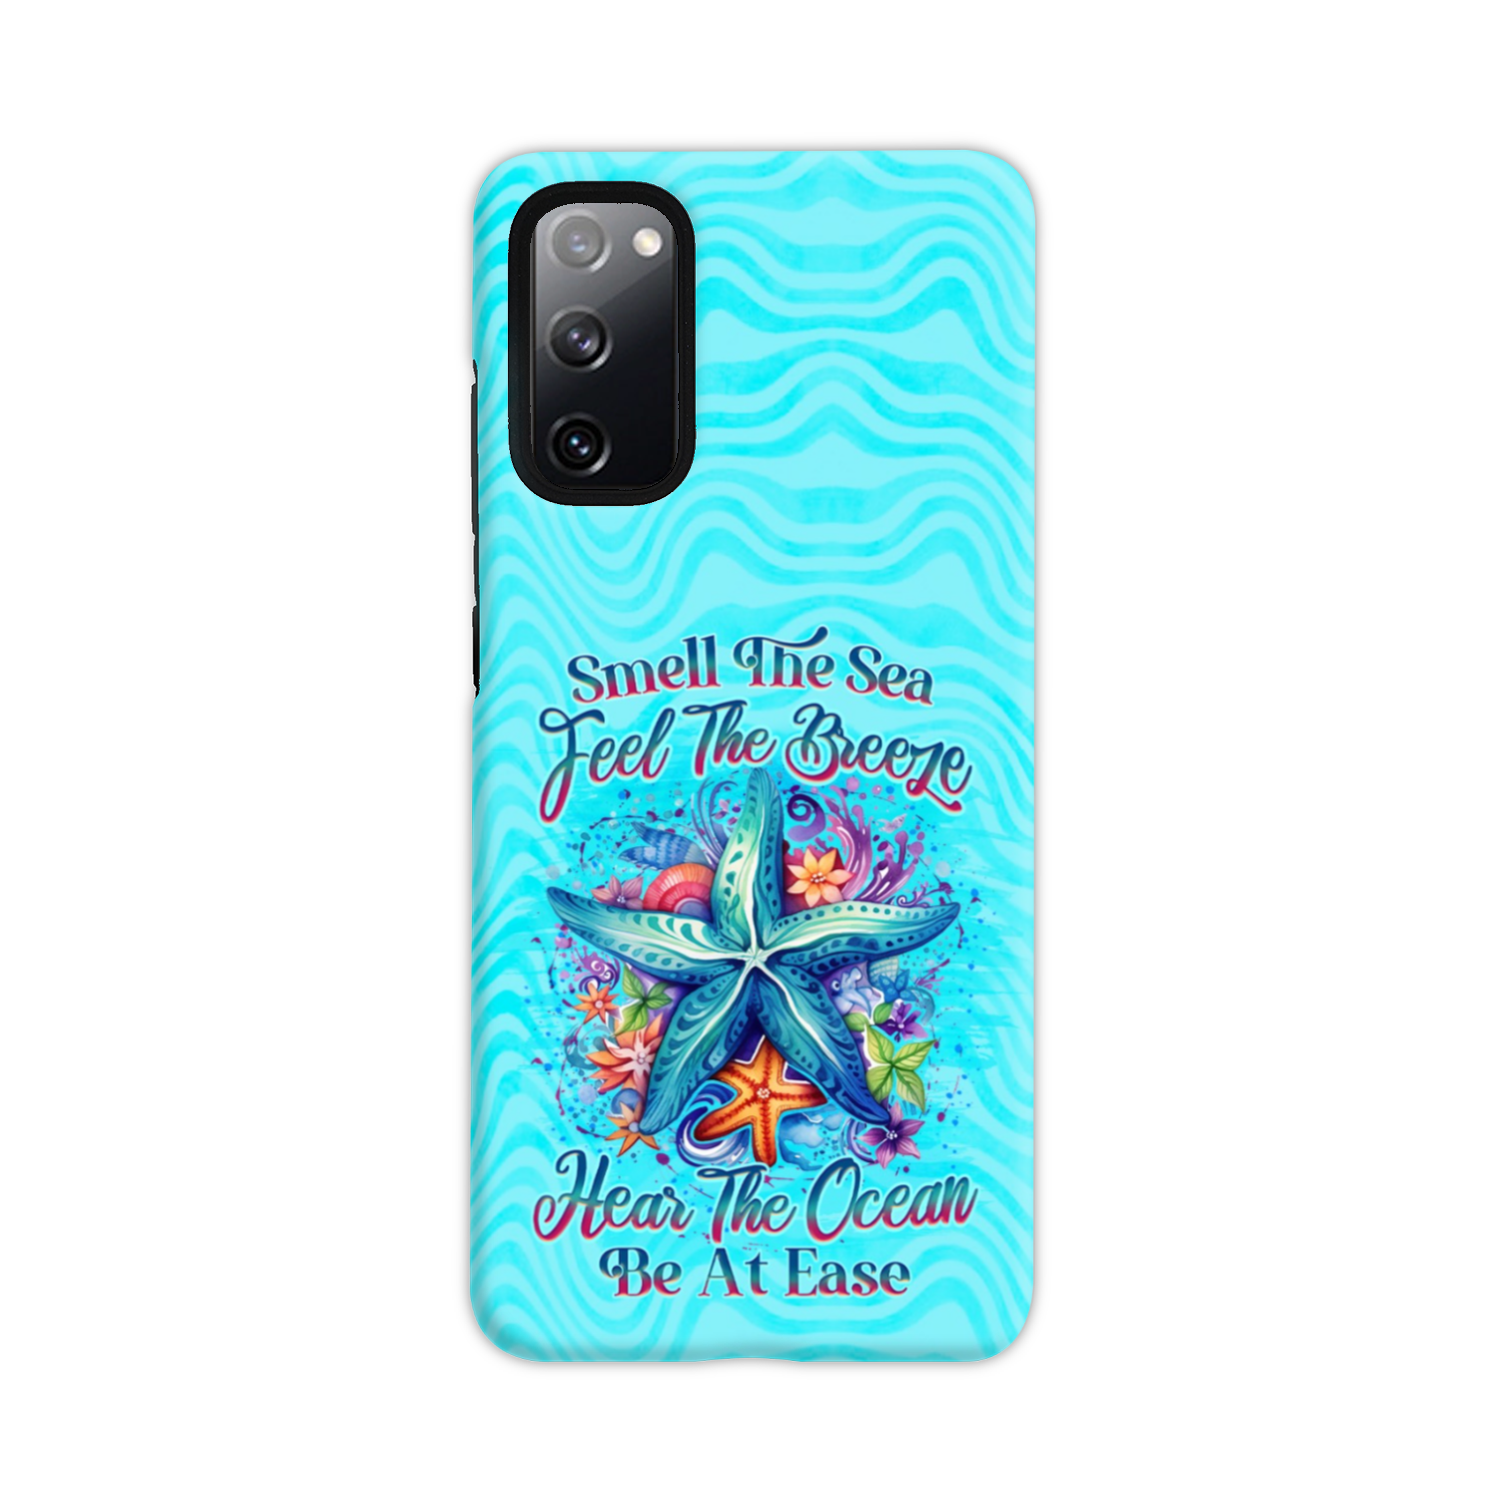 SMELL THE SEA FEEL THE BREEZE STARFISH PHONE CASE - YHLN1007236